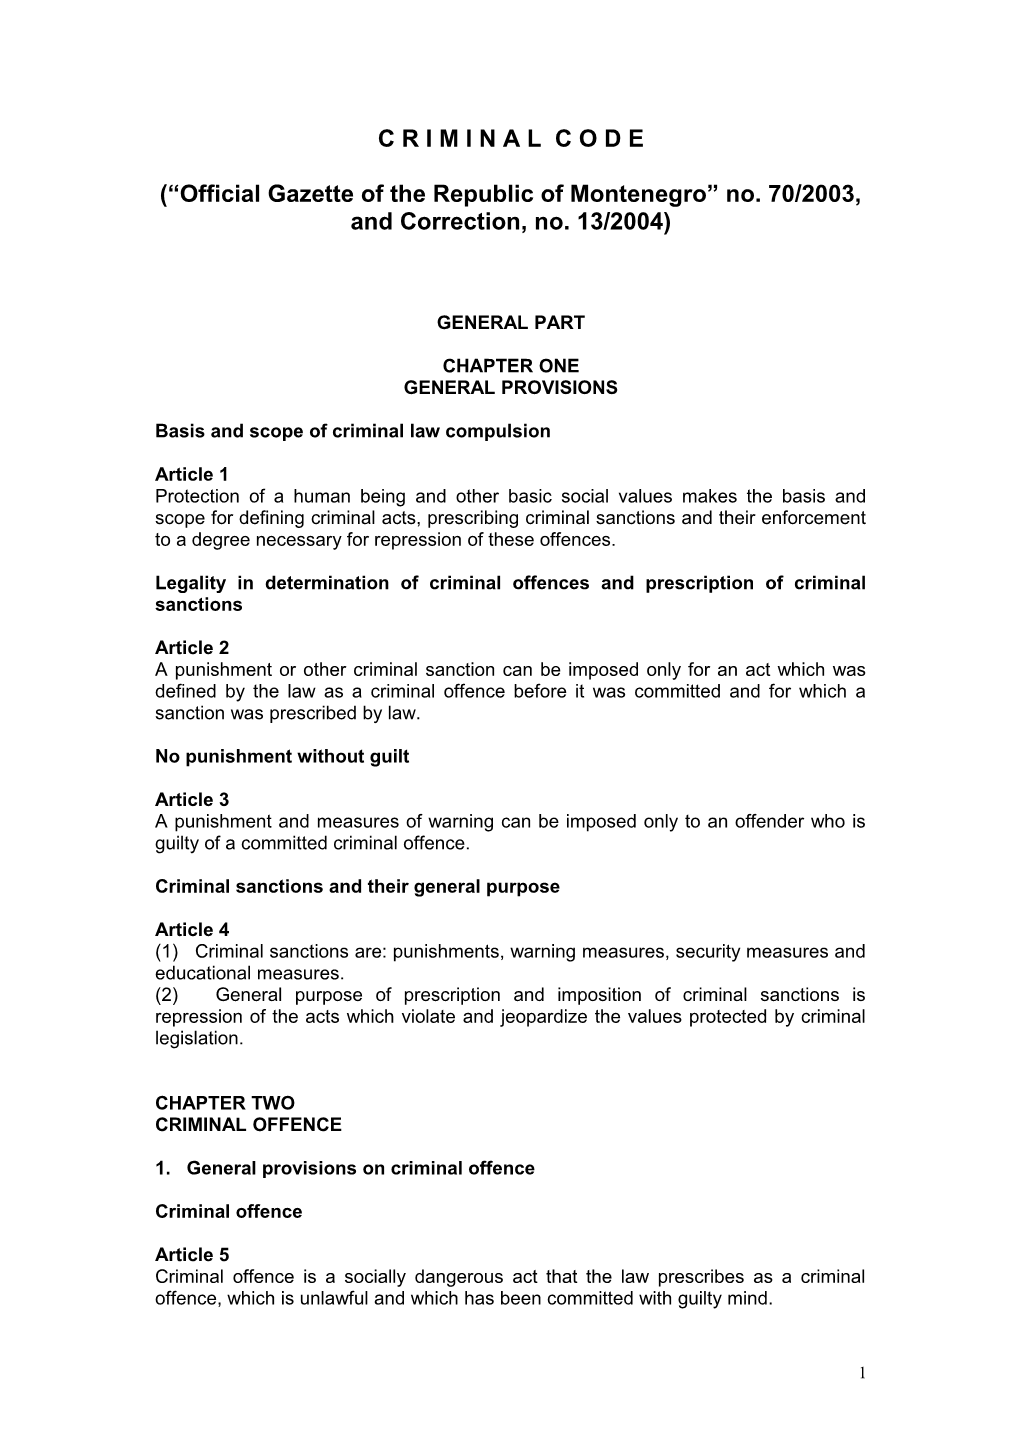 Official Gazette of the Republic of Montenegro No. 70/2003, and Correction, No. 13/2004